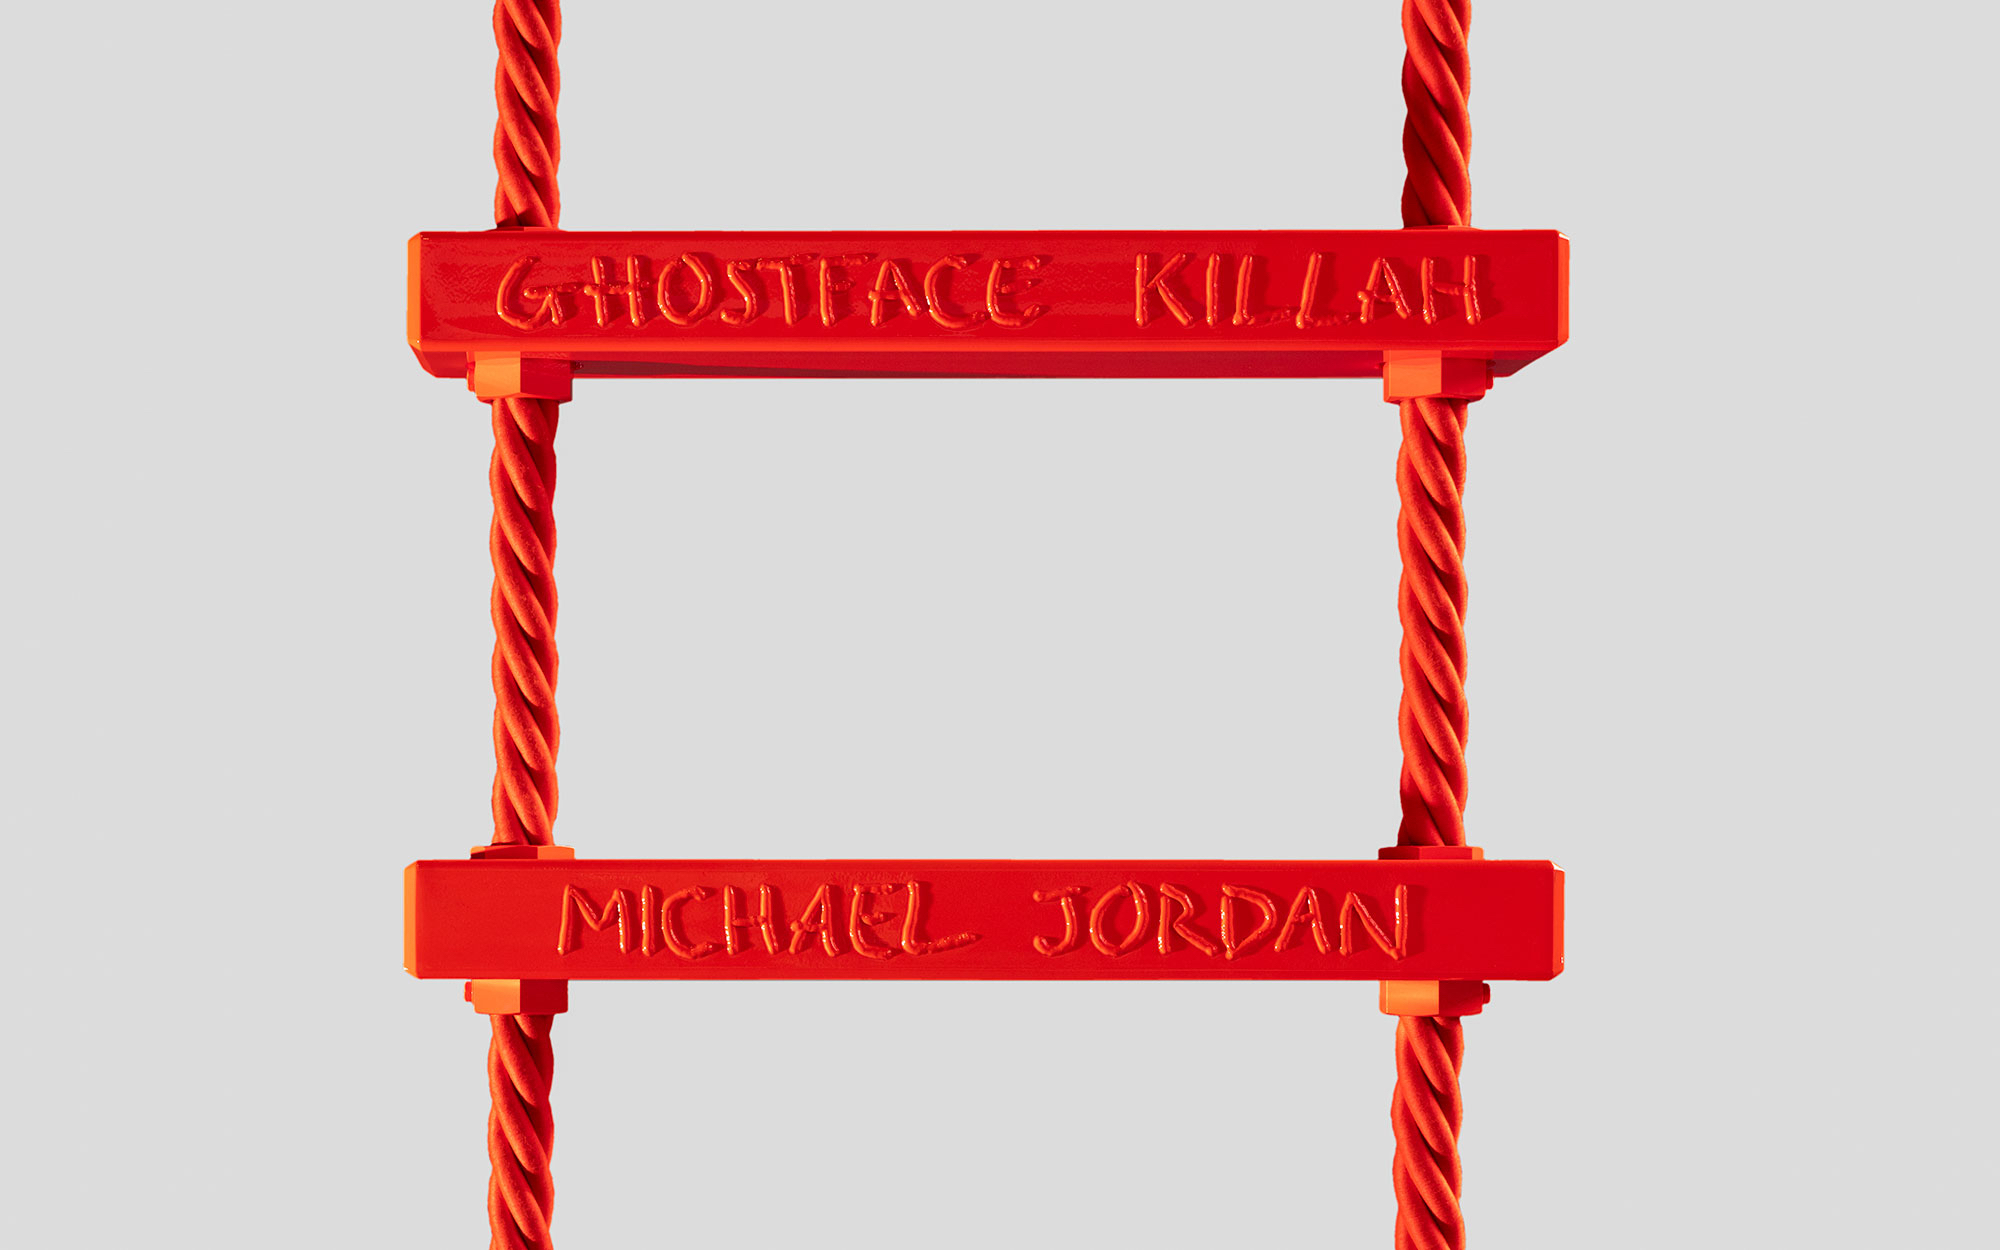 “WORLD LEADERS“ Ladder Special Commission - Virgil Abloh - miscellaneous 9589f51cf3a84e479ea7e835dcba1a04- Galerie kreo